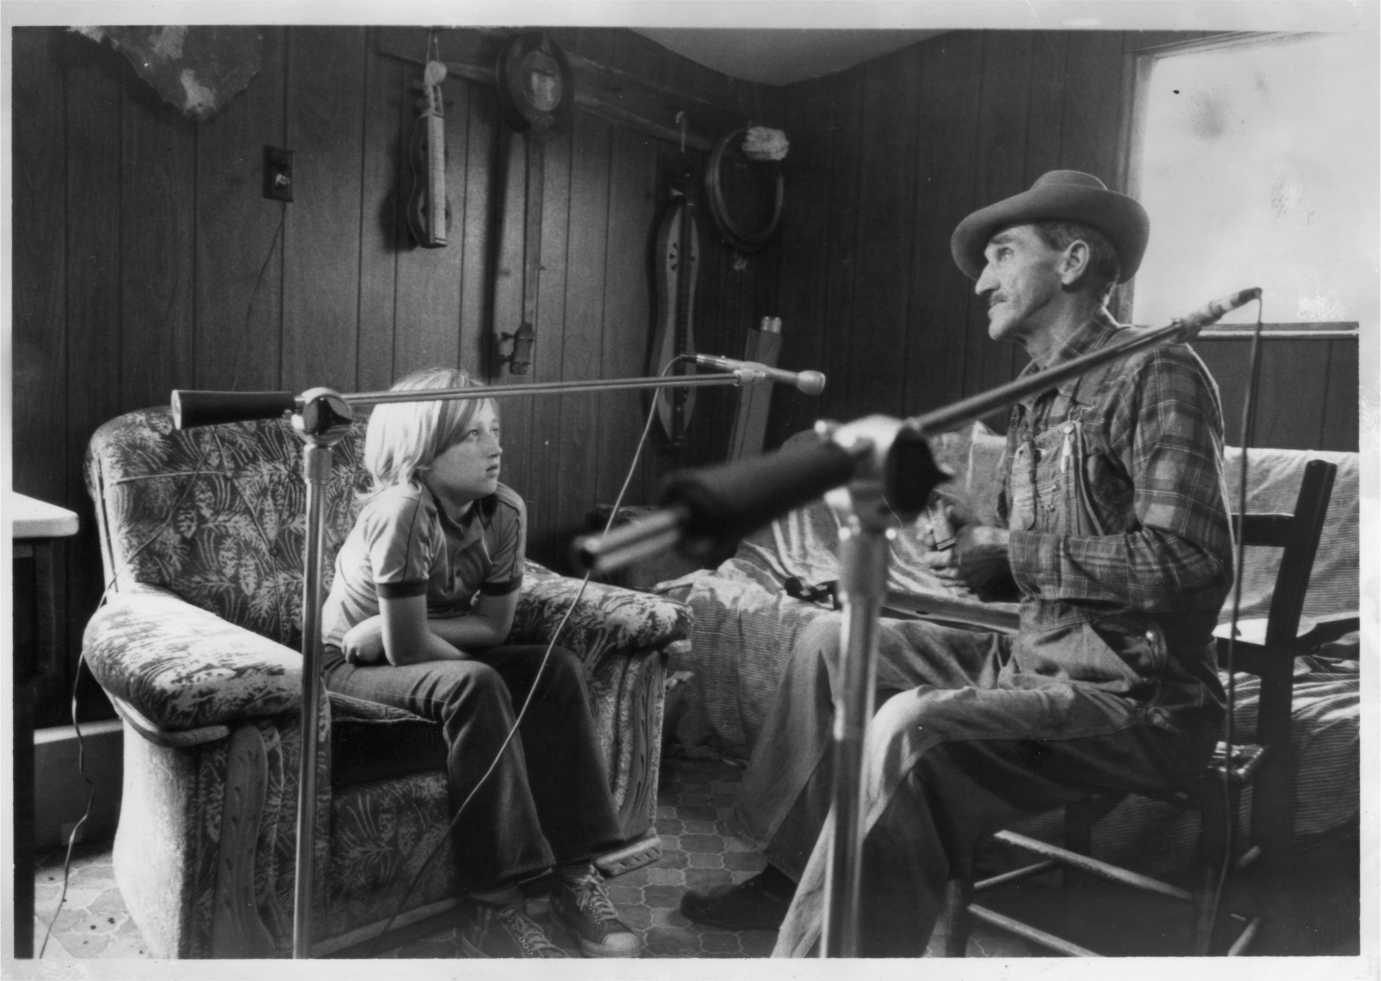 Stanley Hicks, a master storyteller, musician, and toymaker, during an early Foxfire interview. Image courtesy of the Foxfire Center.